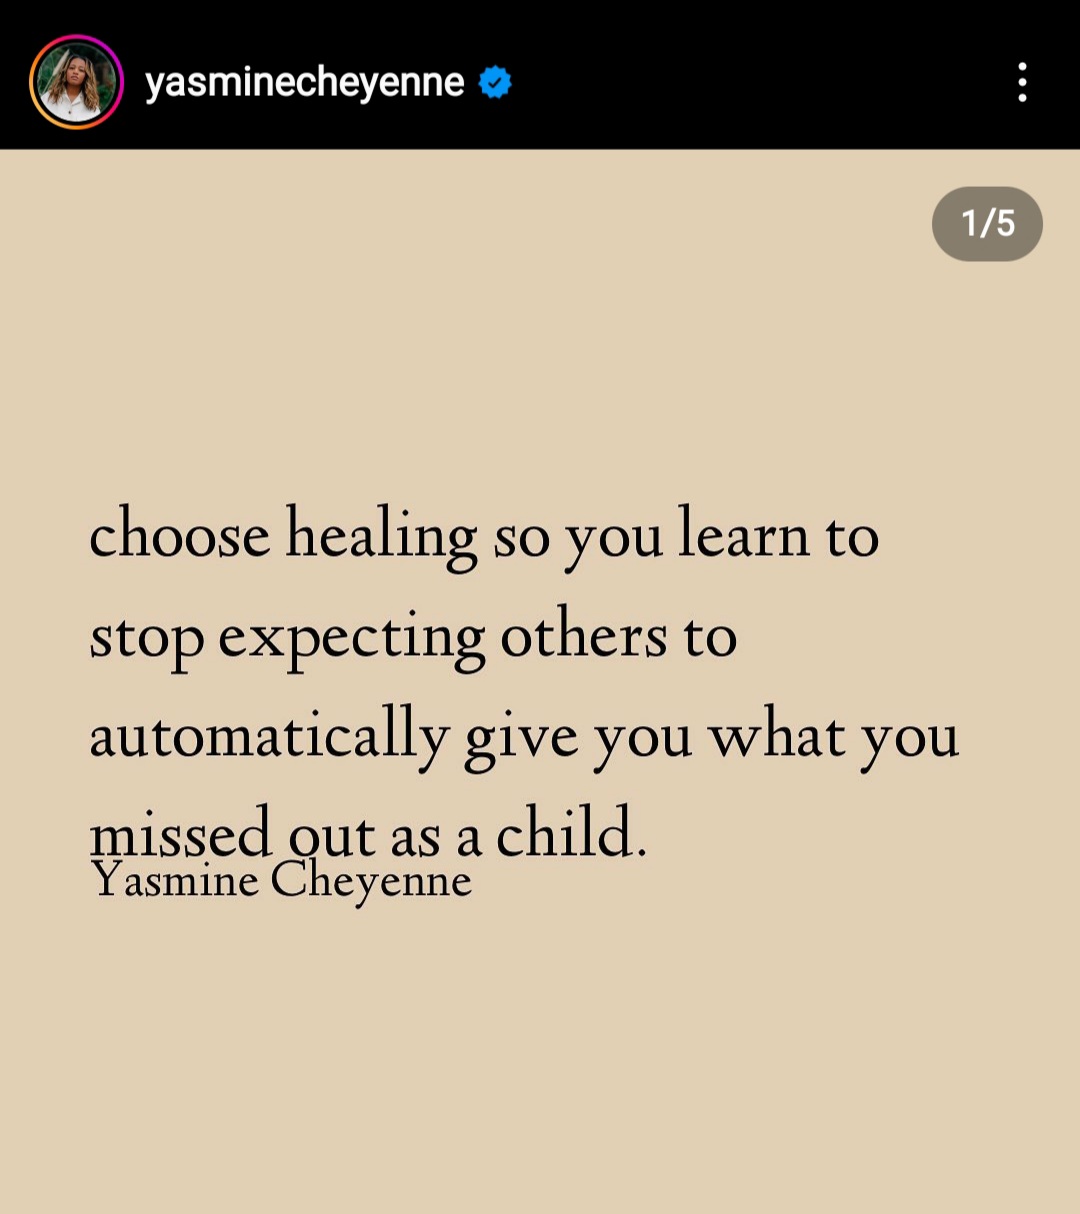 choose healing so you learn to stop expecting others to automatically give you what you missed out as a child. Yasmine Cheyenne, coaching tip